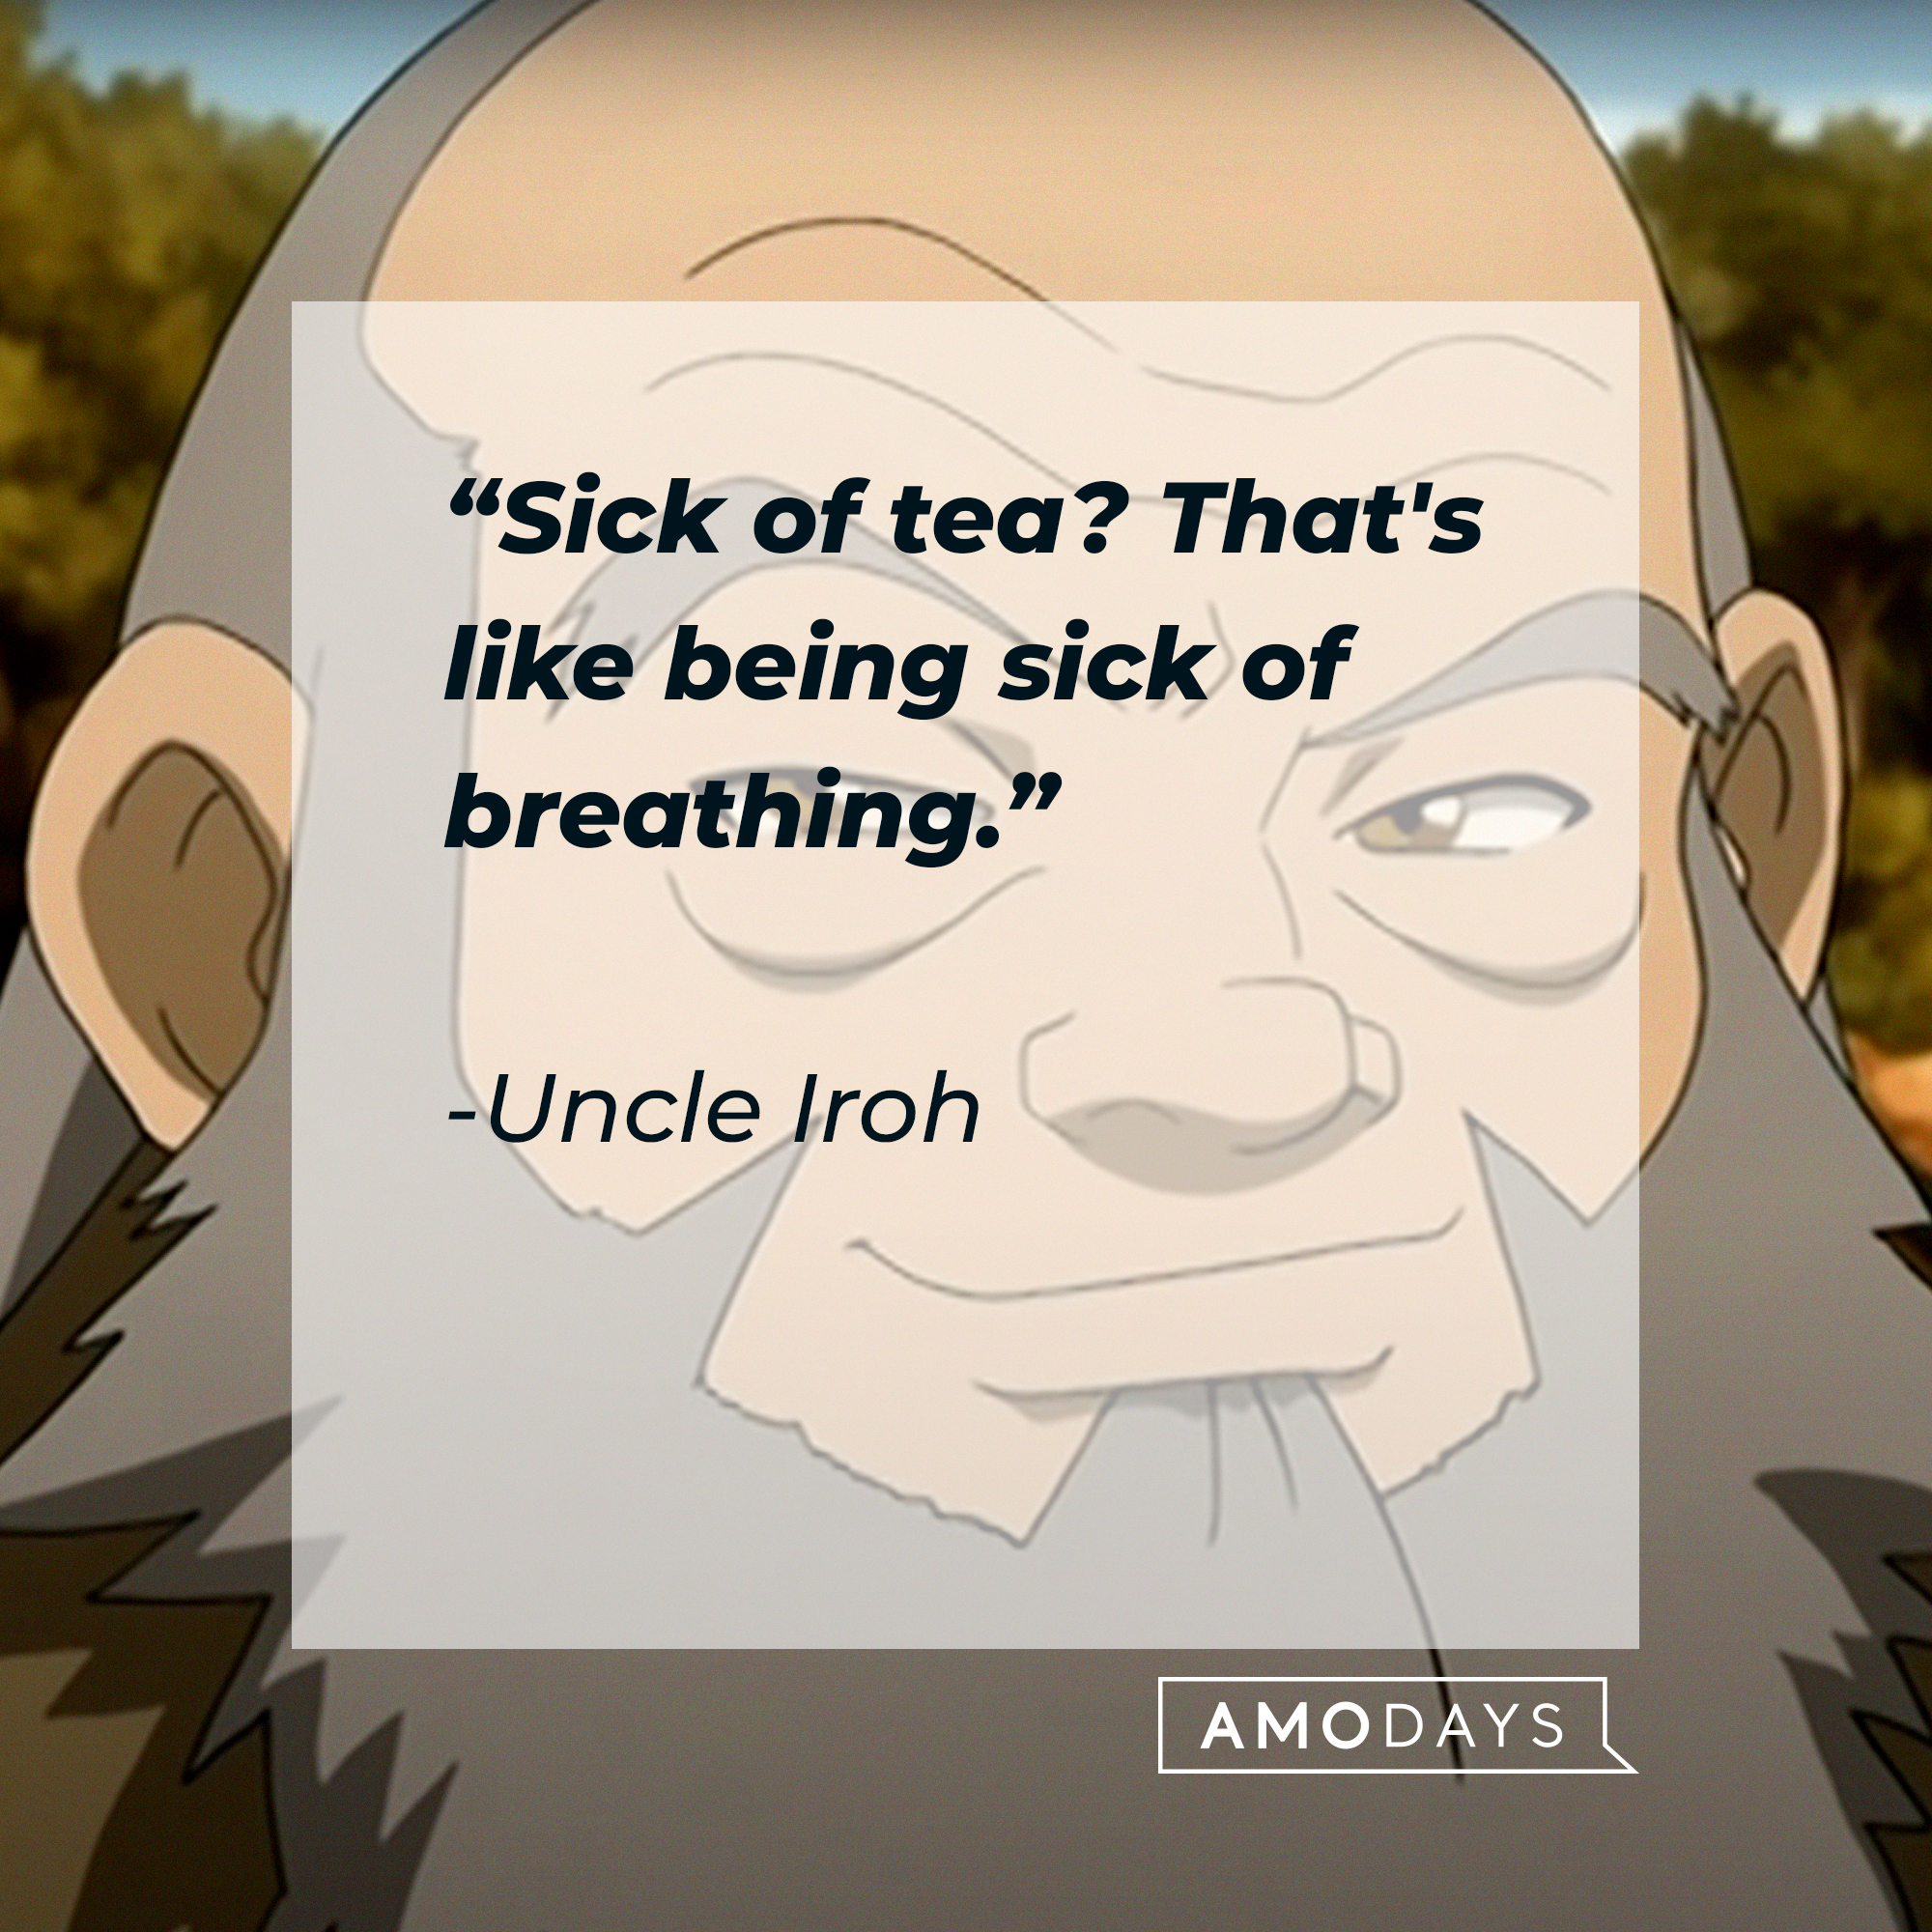 Uncle Iroh, with his quote: "Sick of tea? That's like being sick of breathing." | Source: Youtube.com/TeamAvatar